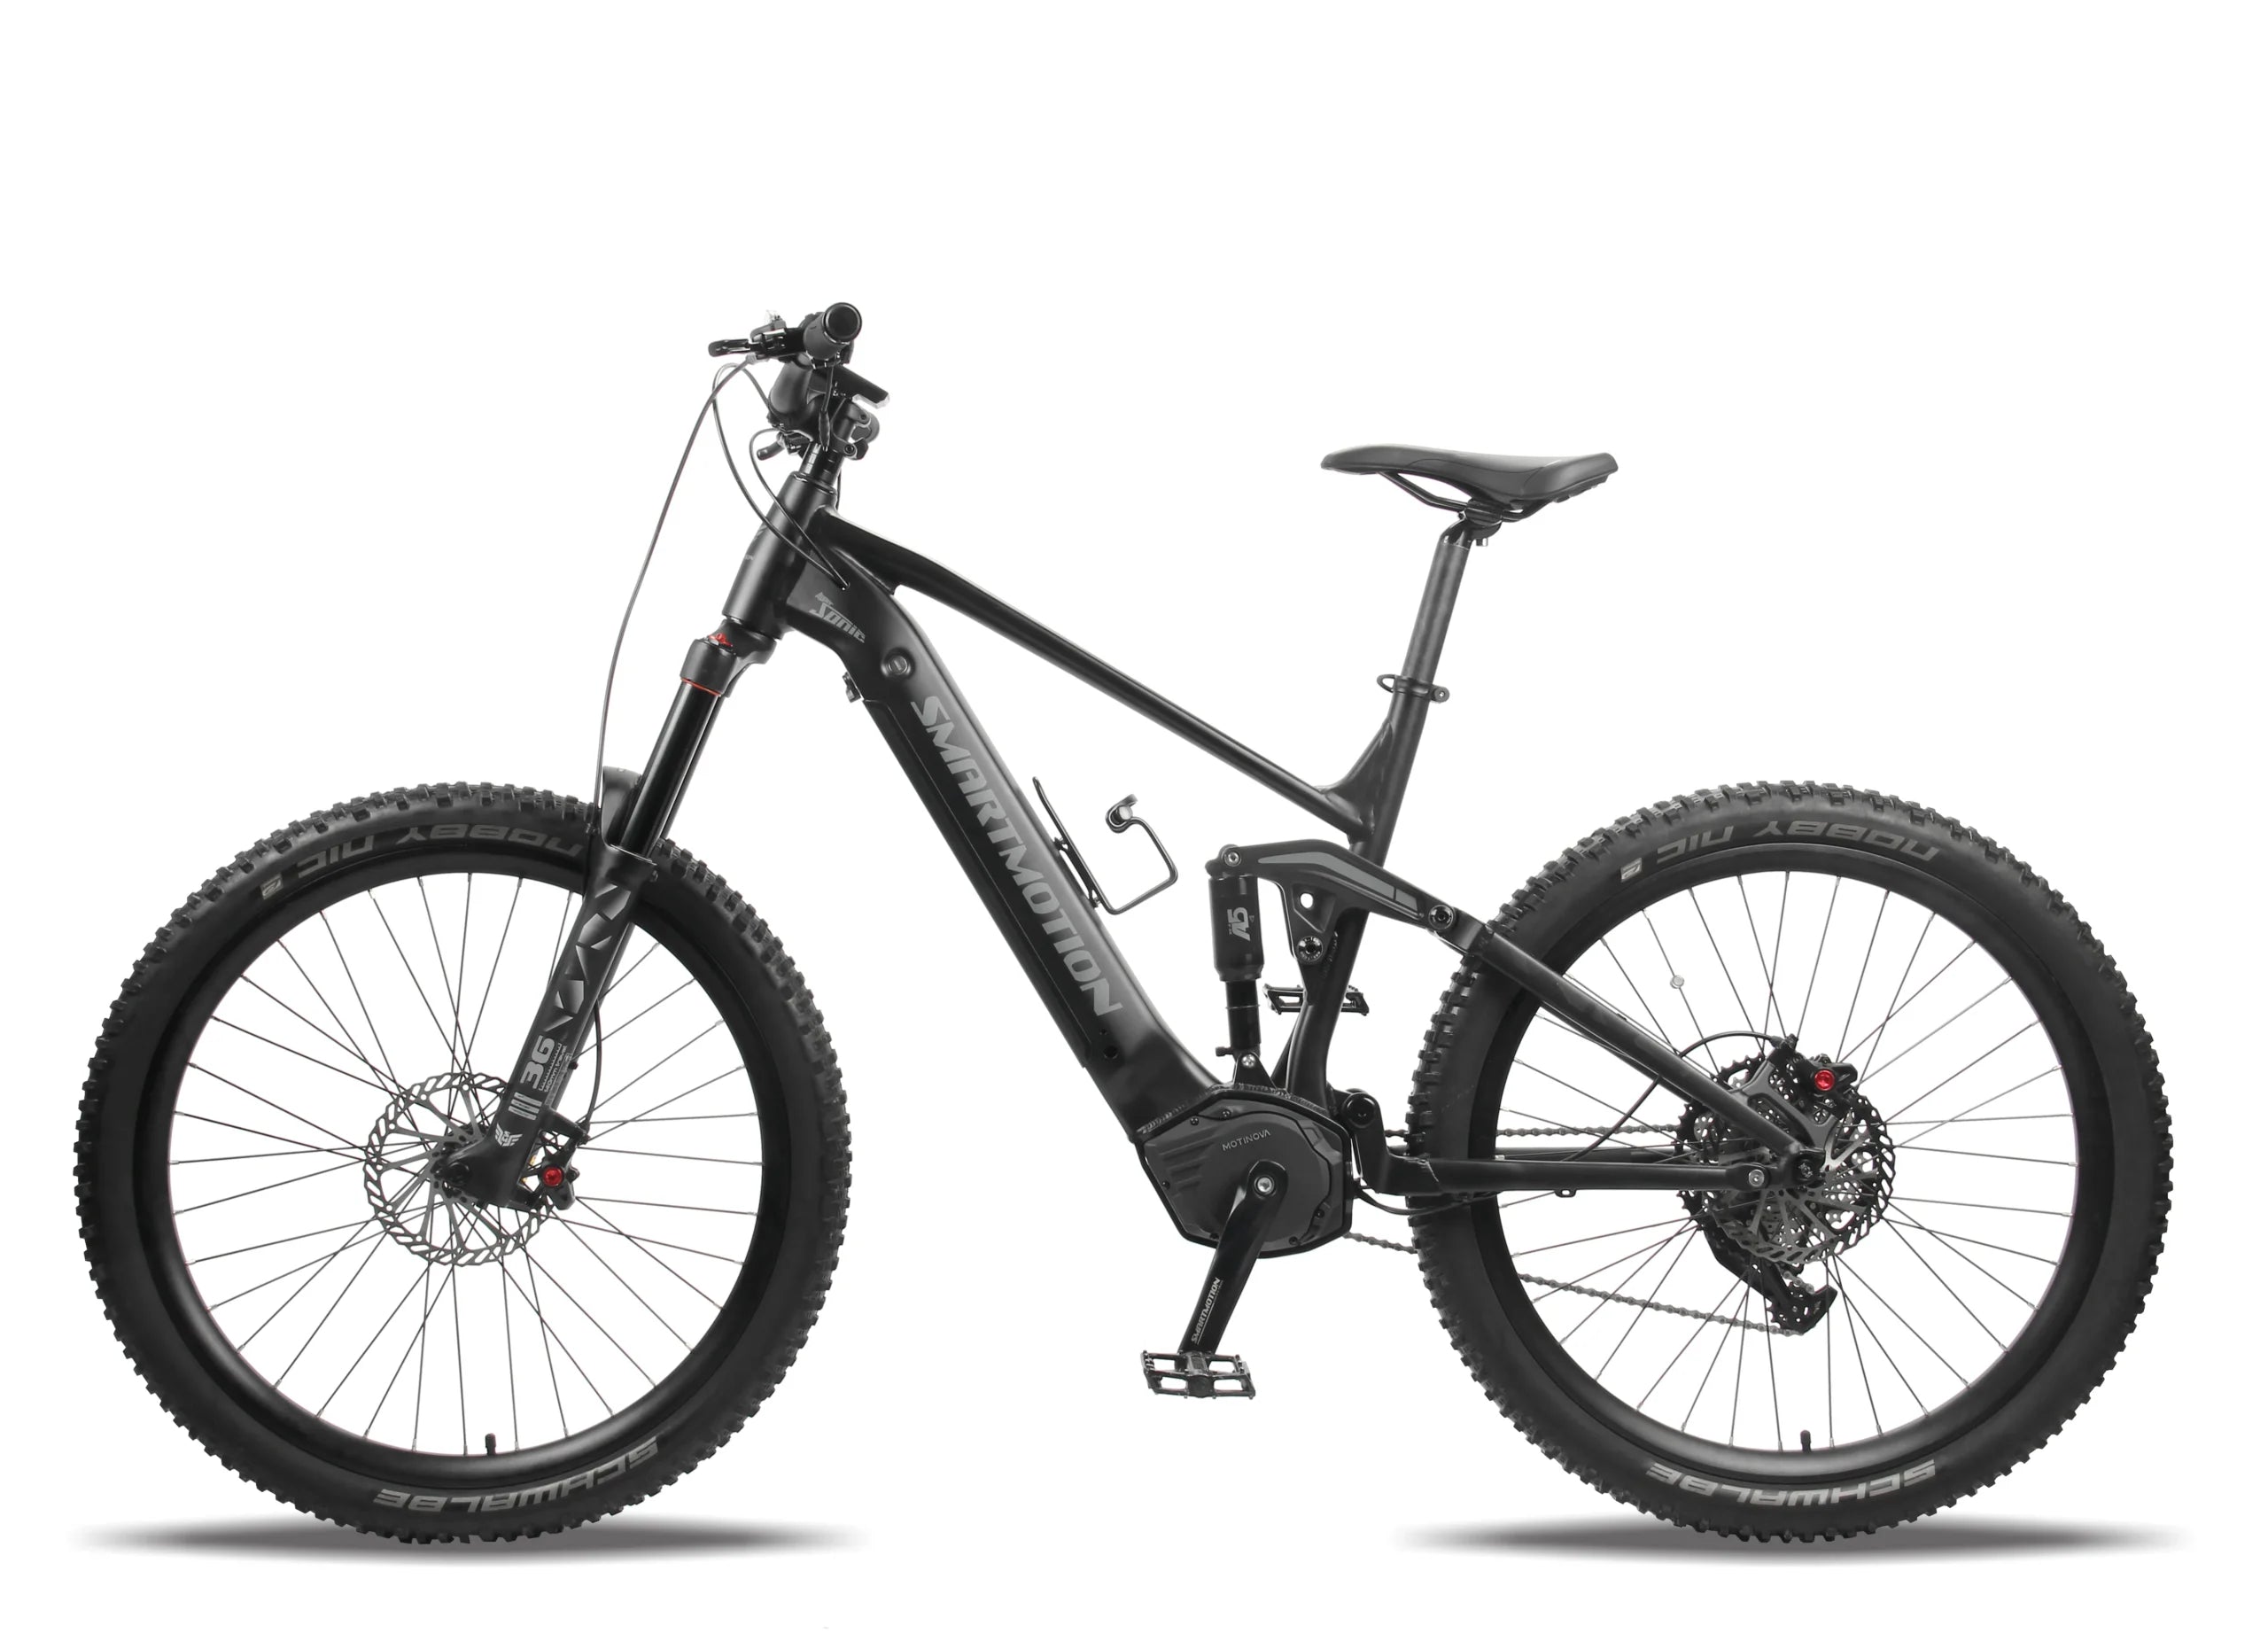 SMARTMOTION HYPERSONIC NEO | Ebikeboys